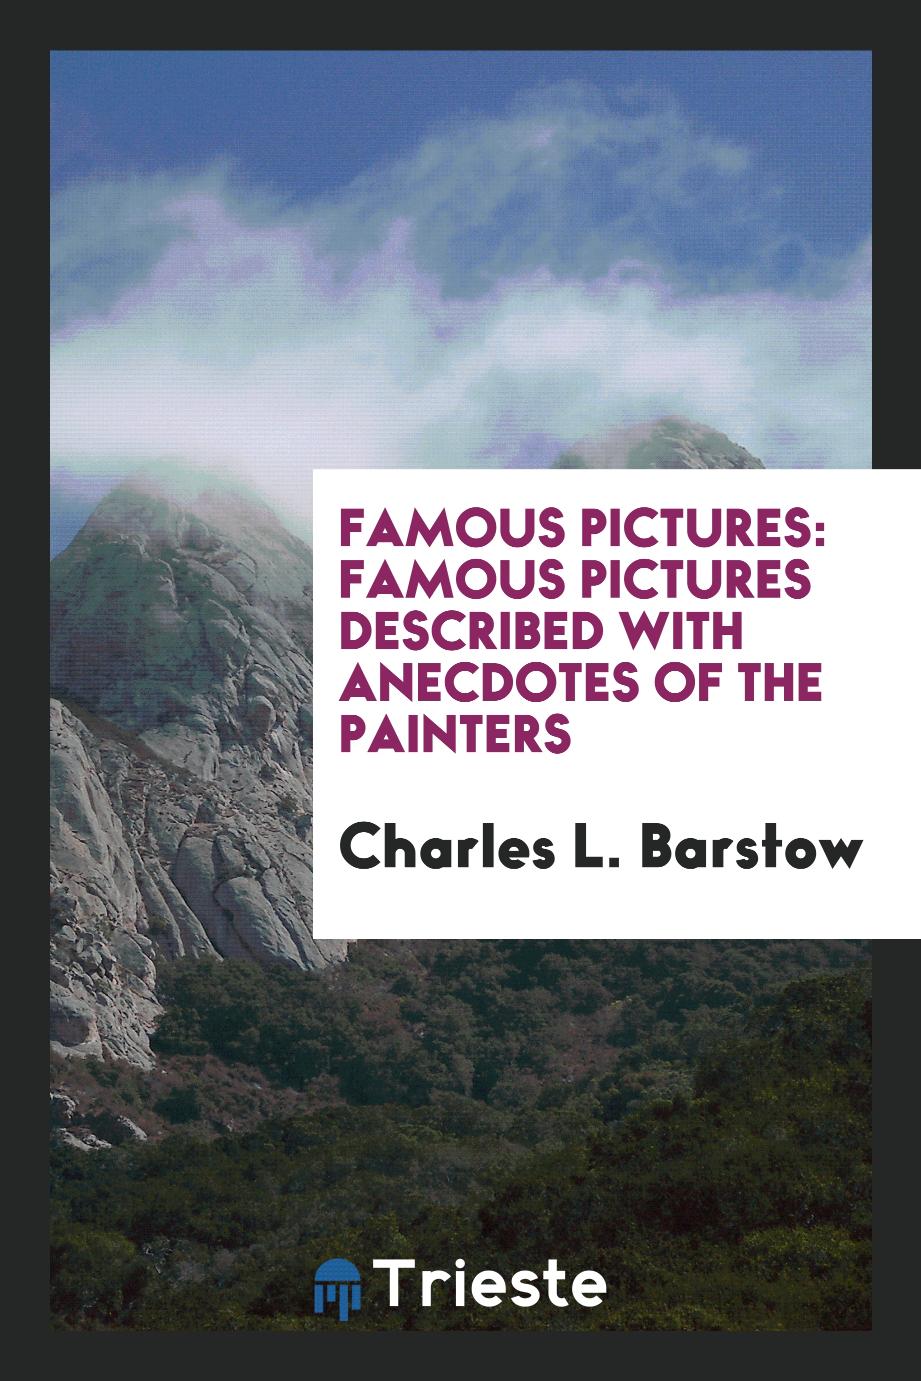 Famous Pictures: Famous Pictures Described with Anecdotes of the Painters